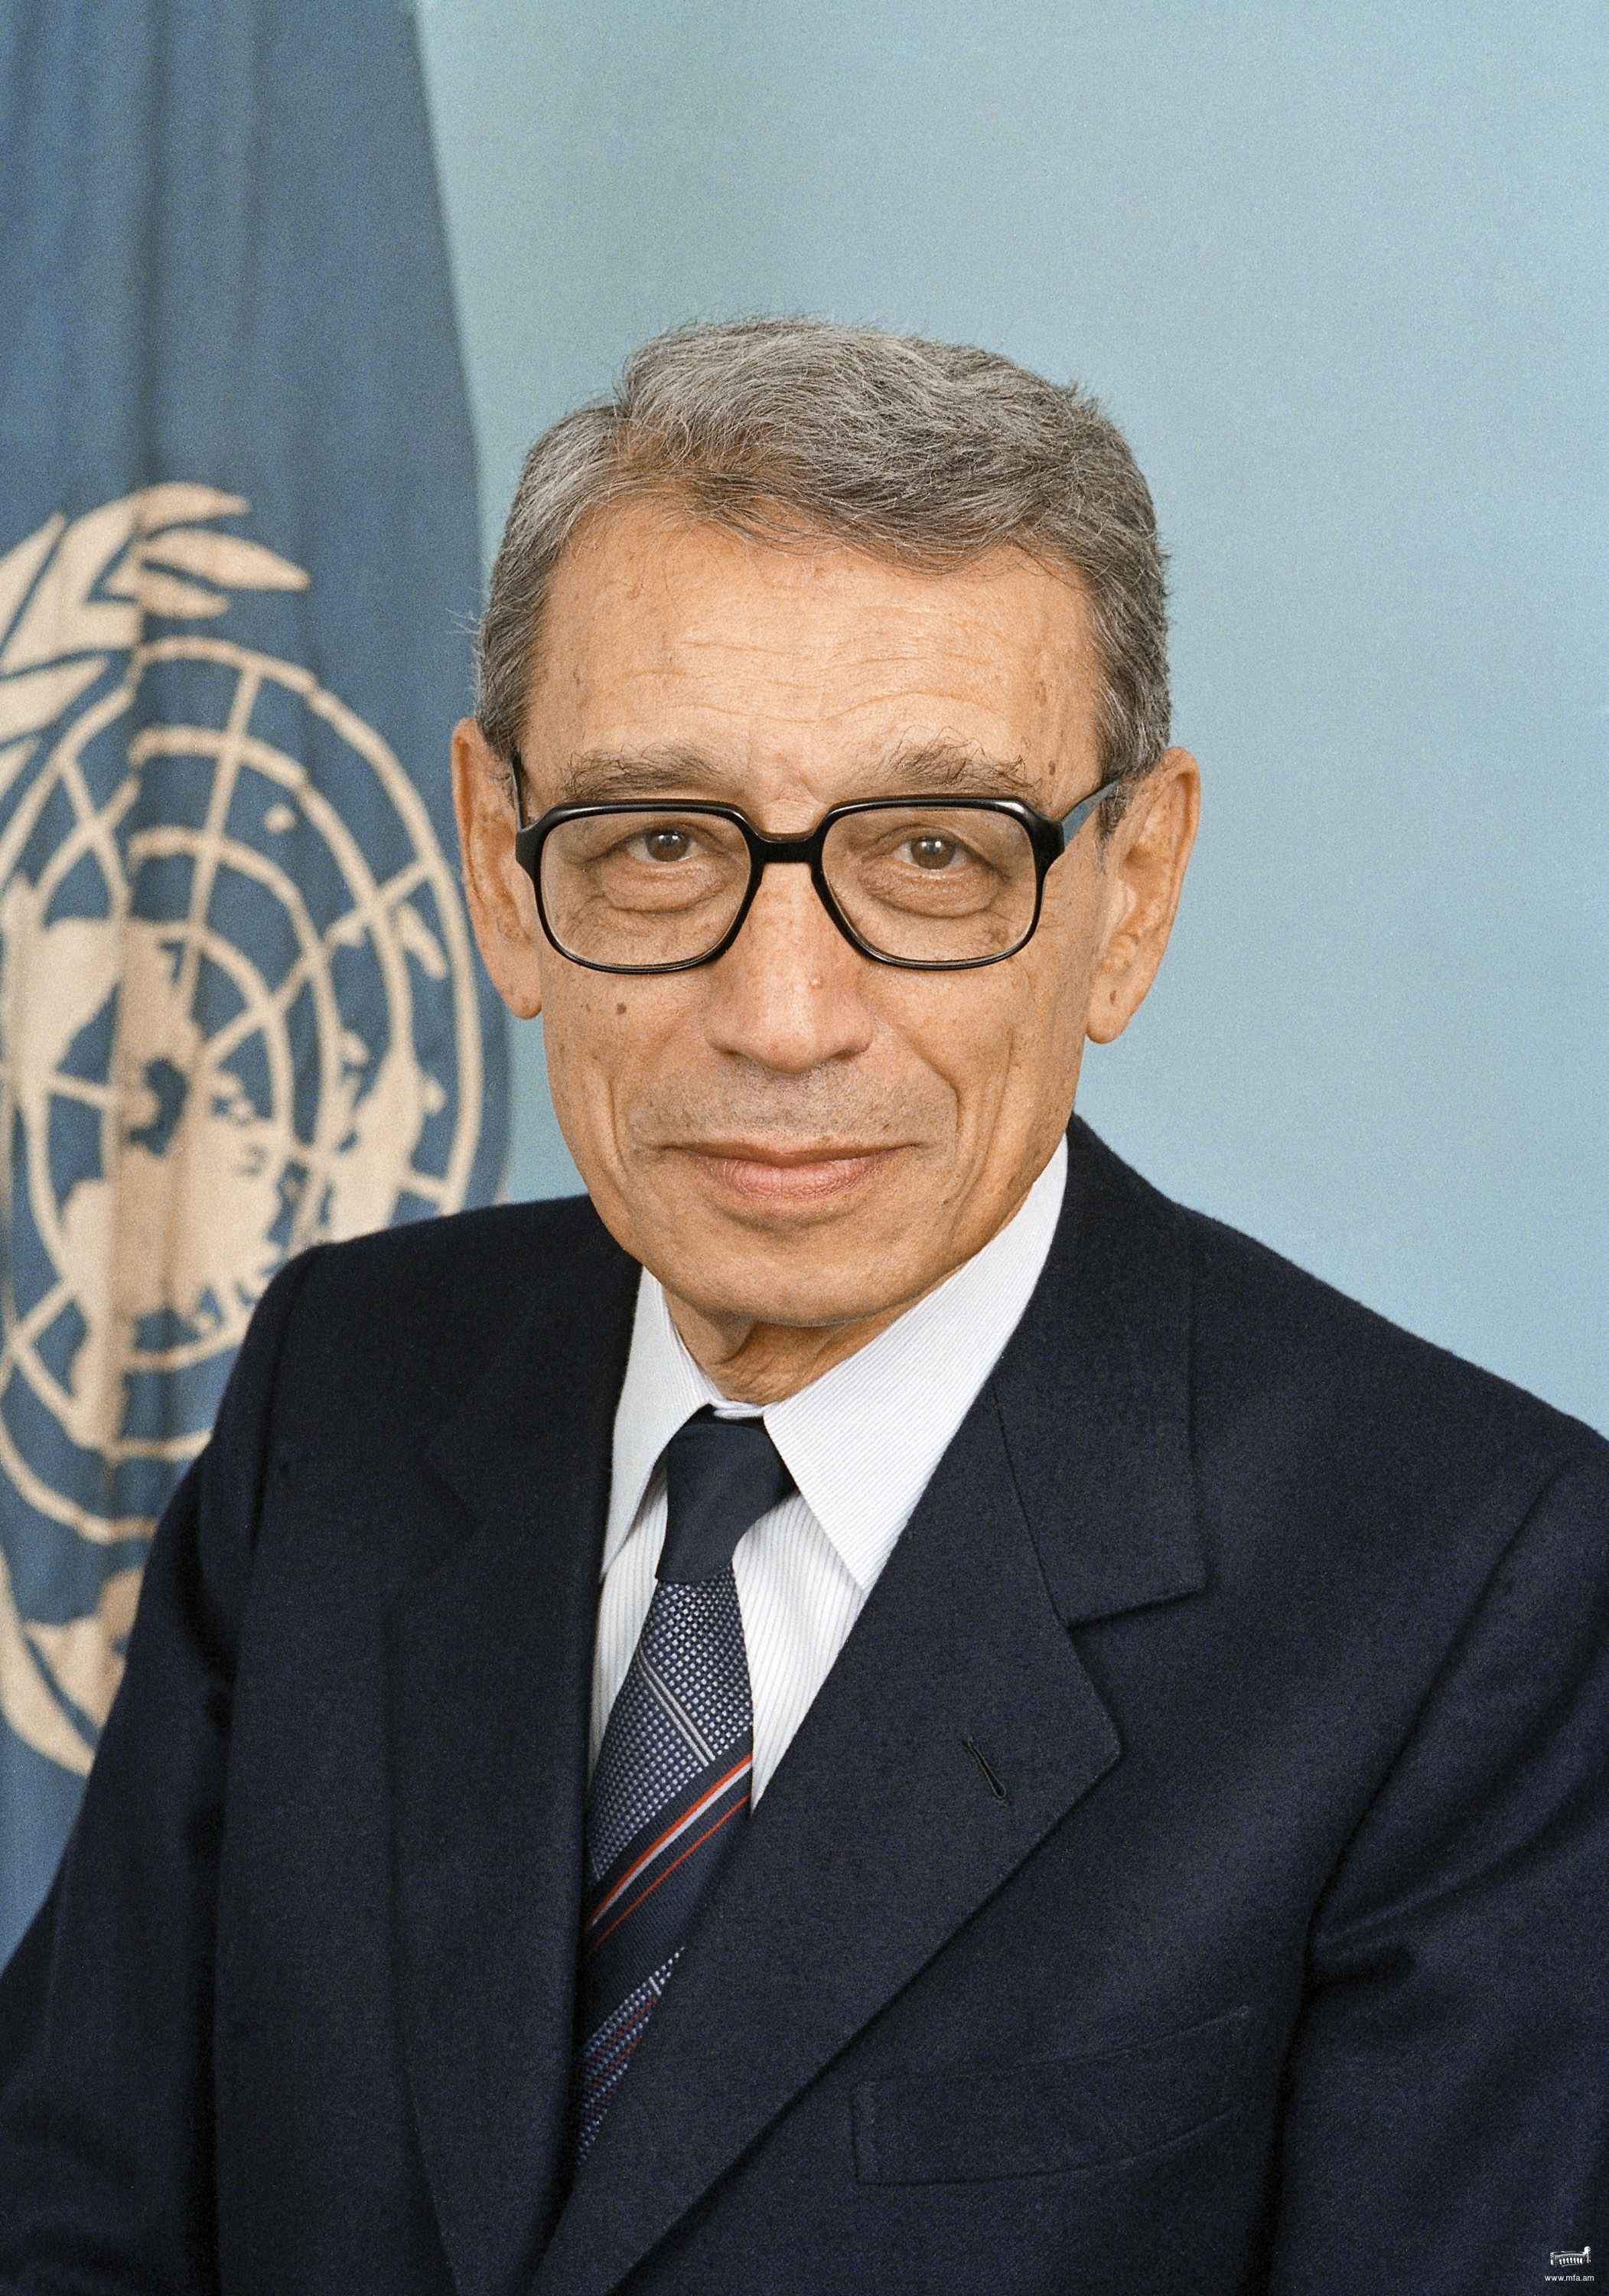 Foreign Minister Edward Nalbandian extended condolences on the death of the former UN Secretary-General Boutros Boutros-Ghali